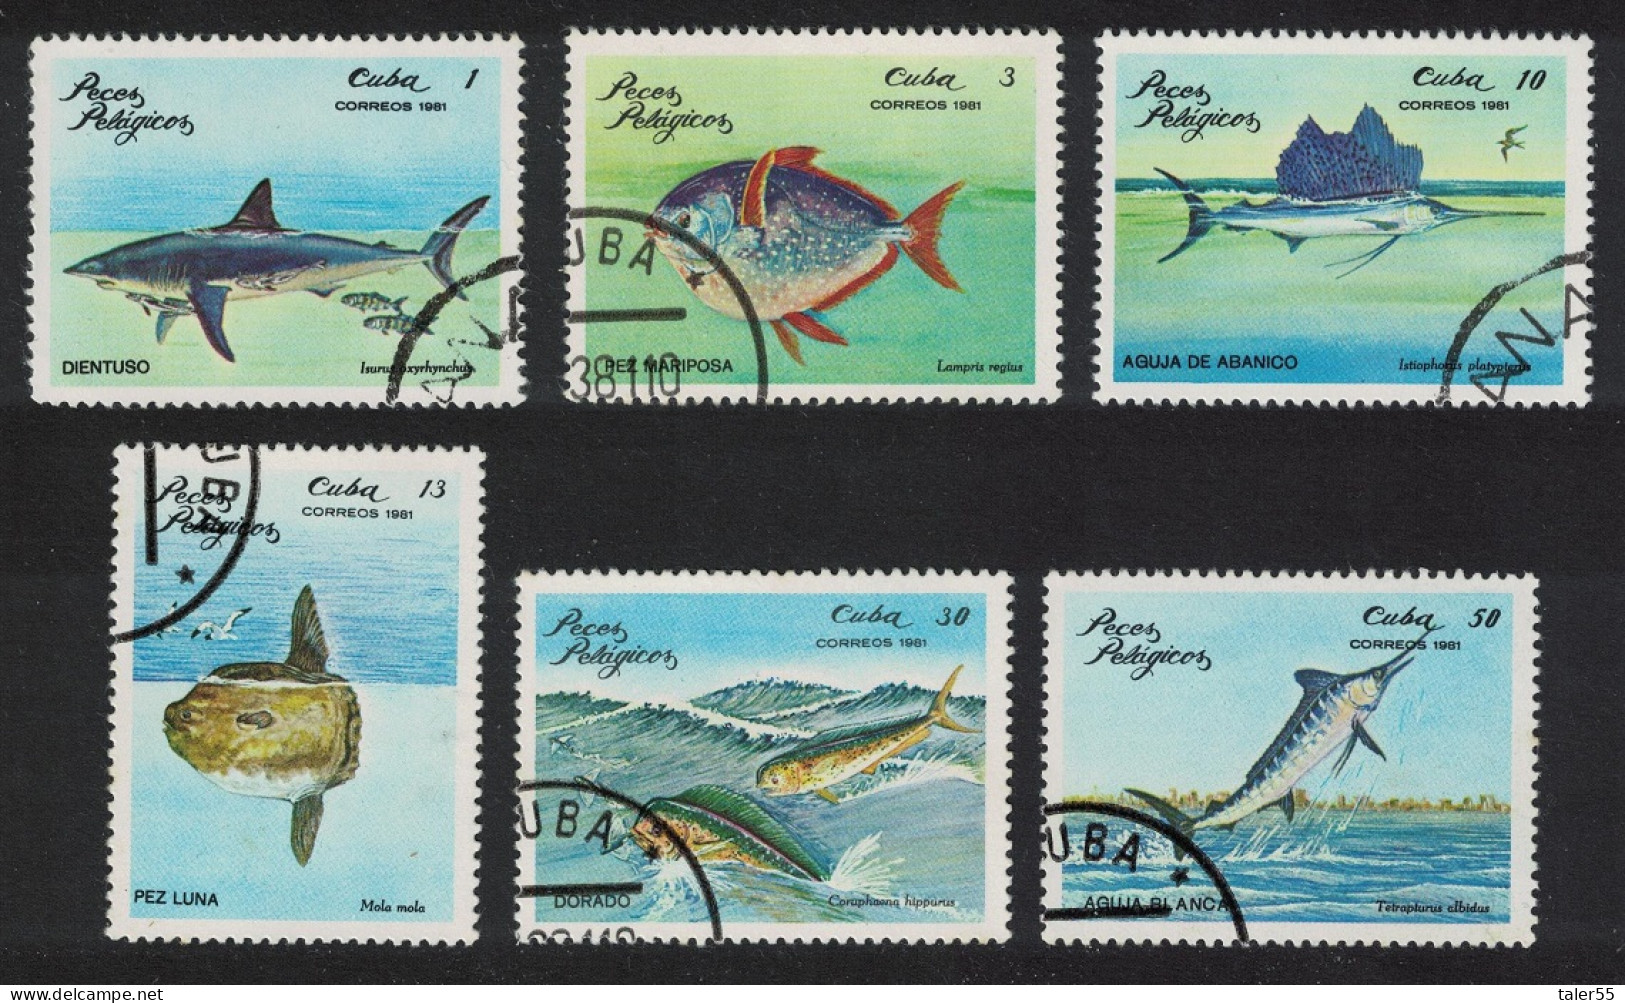 Caribic Fish 6v 1981 CTO SG#2691-2696 - Used Stamps